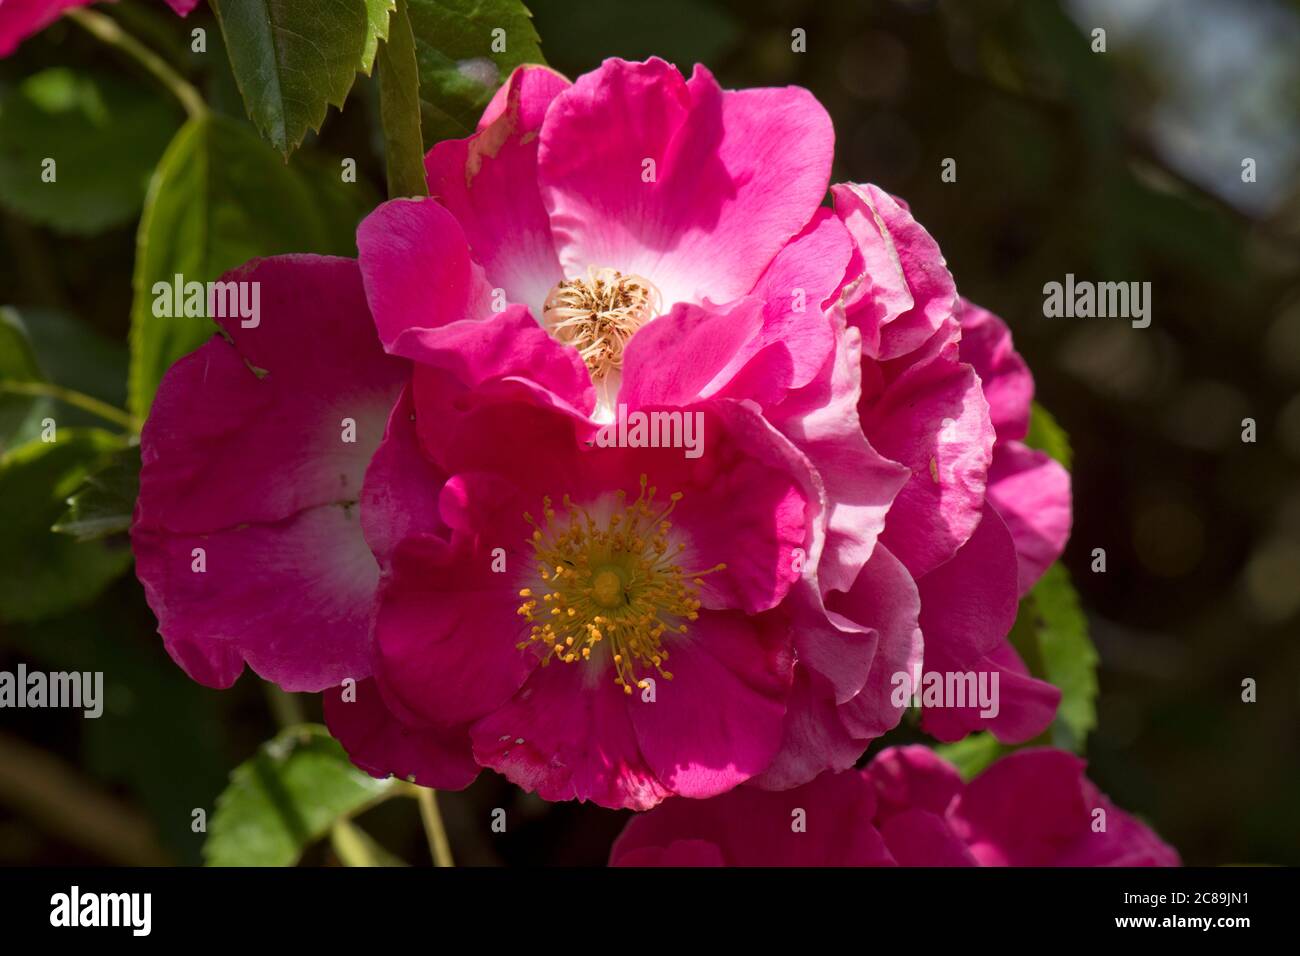 Bright pink prolific flowers of rambling rose 'American Pillar' growing over a rose arch in sunlight, Berkshire, June Stock Photo